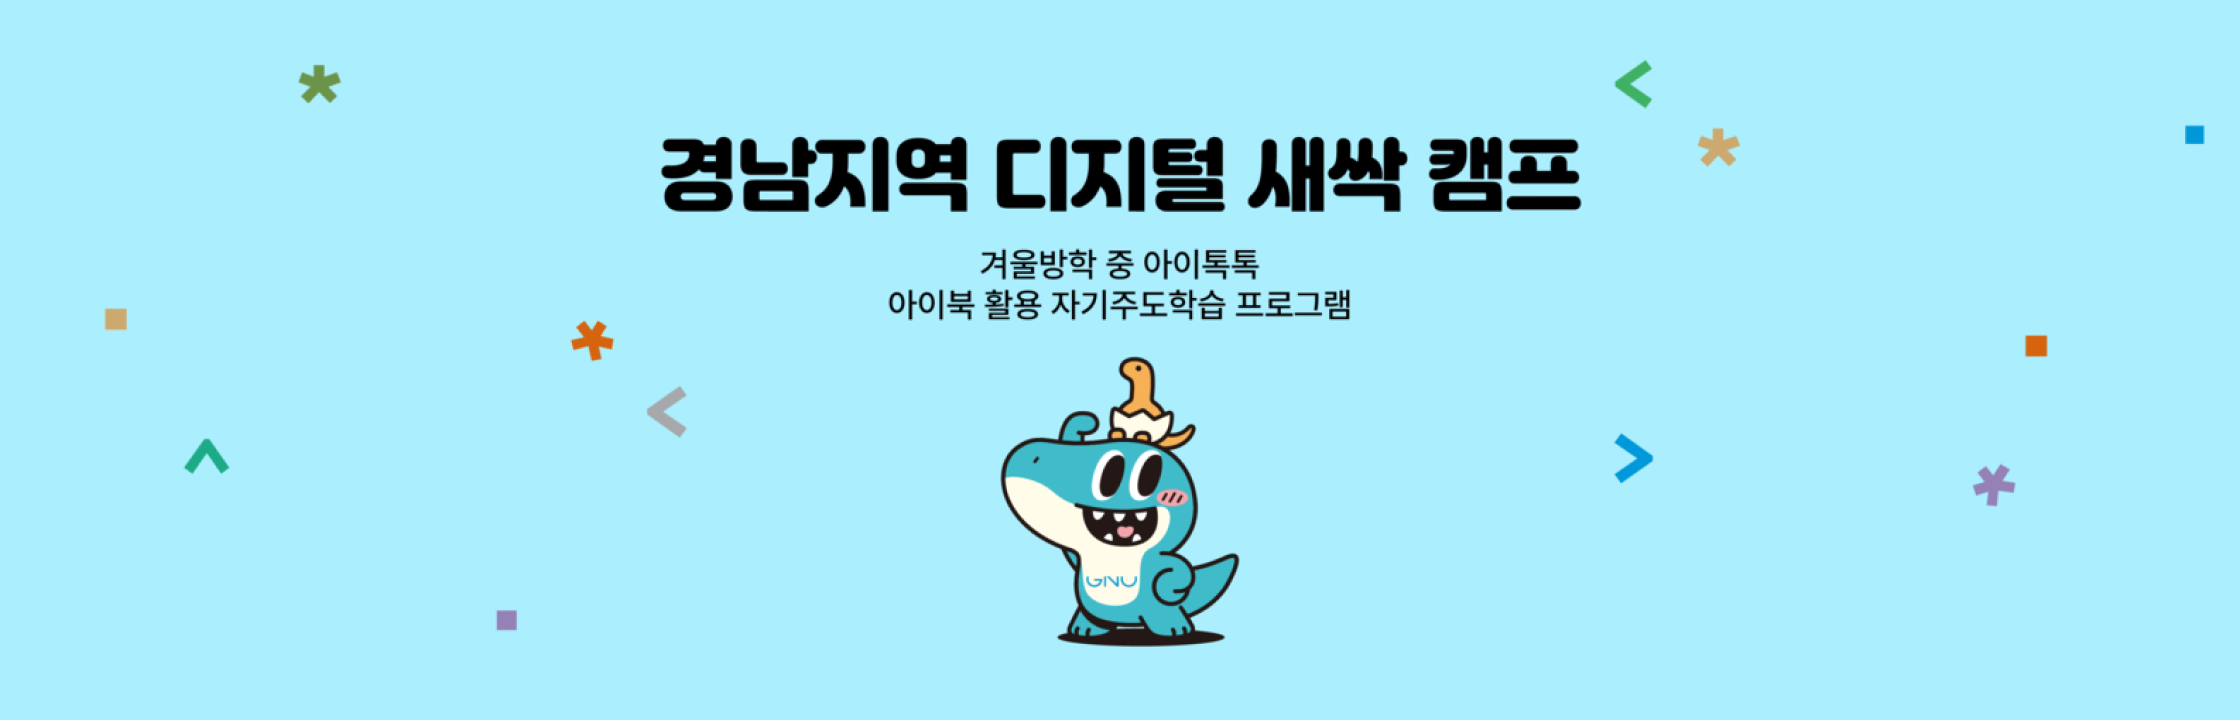 The first step in future talent
Gyeongsang National University X Elice Digital Sprout Camp